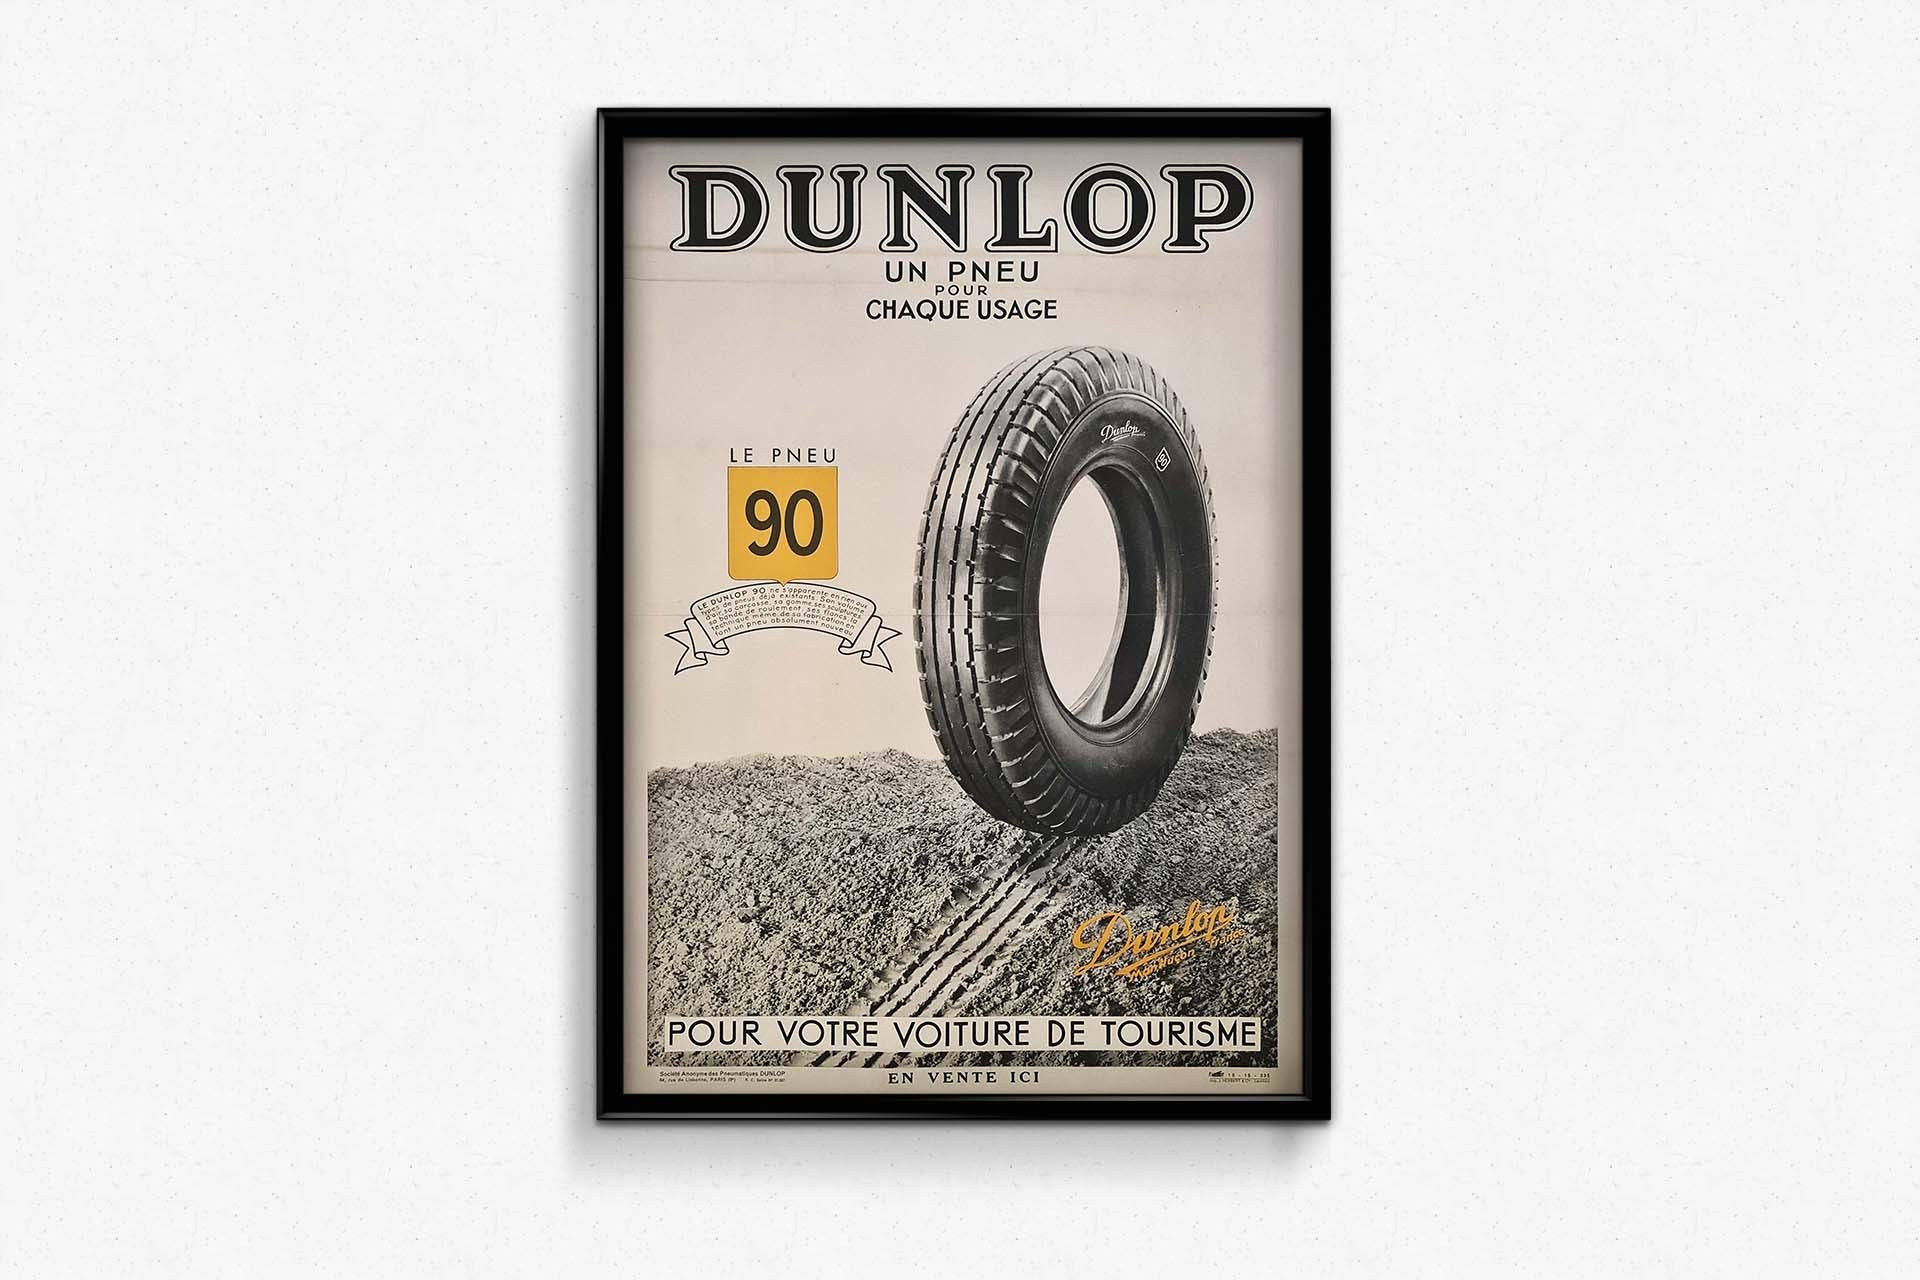 The 1935 original advertising poster for Dunlop unveils the Tire 90, a tire engineered for every driving need. Crafted by J. Herbert & Cie in Levallois, this poster epitomizes Dunlop's tireless pursuit of excellence in the automotive industry.
With